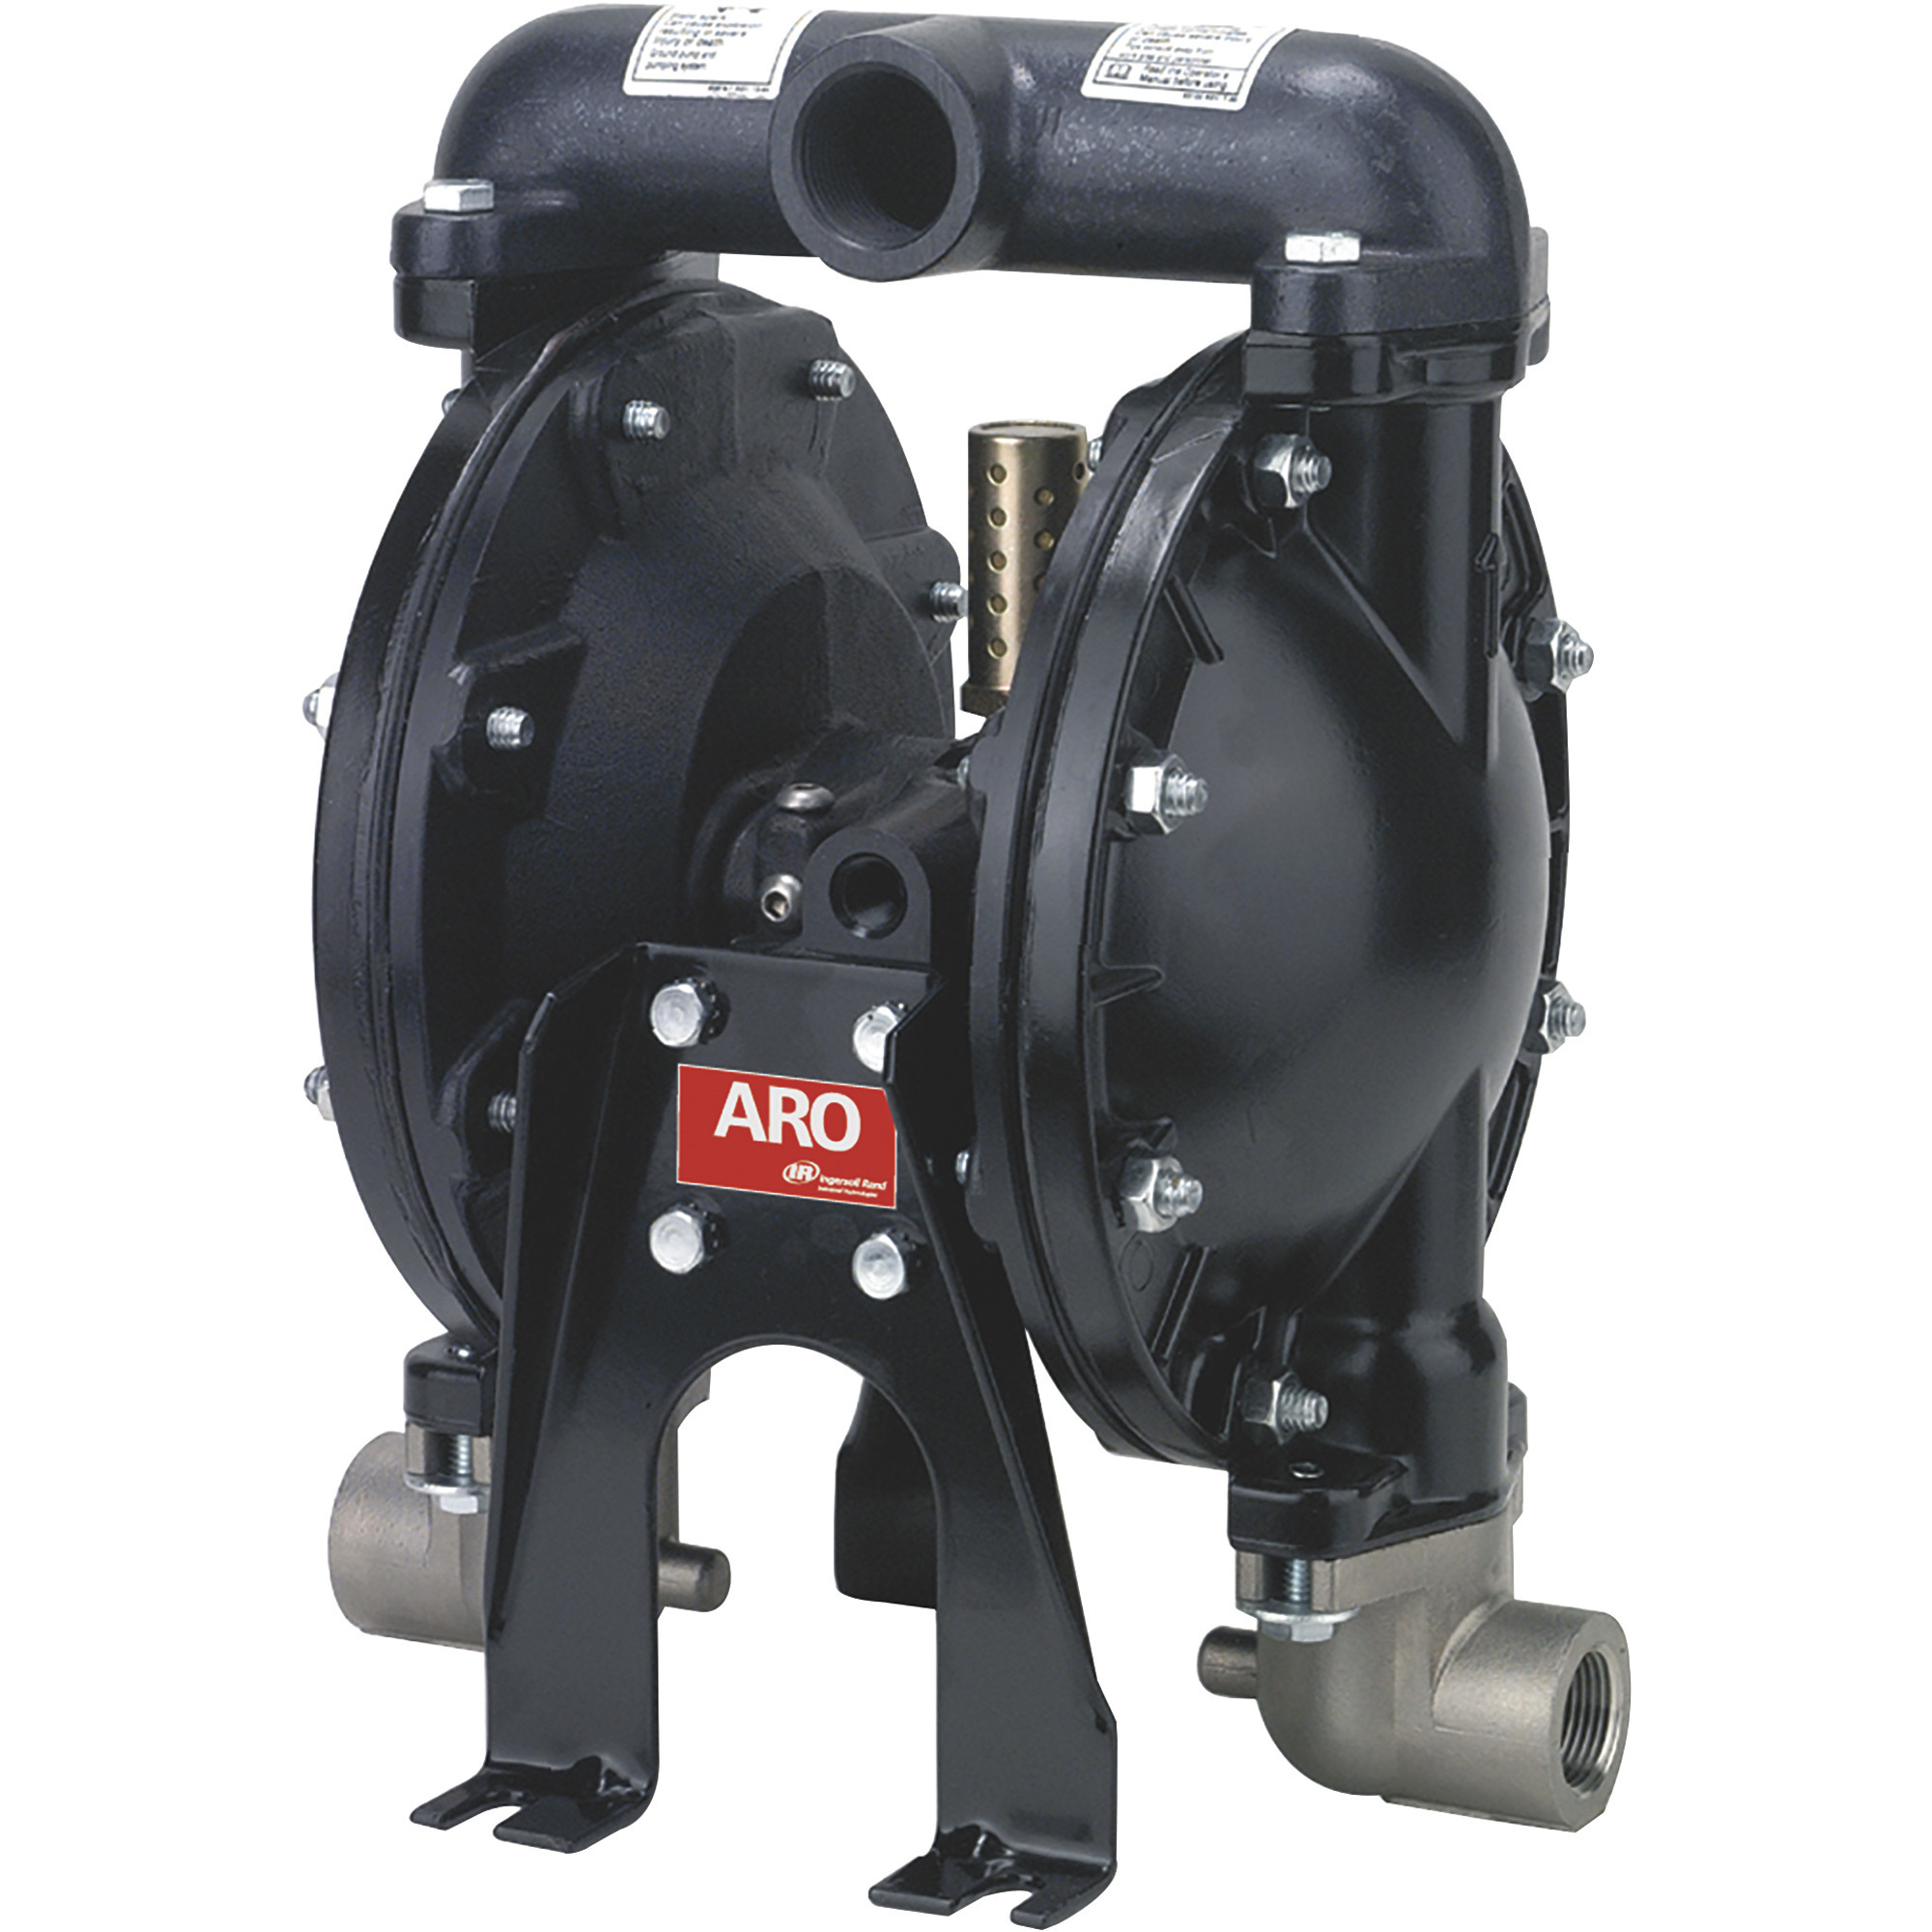 ARO Air-Operated Double Diaphragm Pump, 1Inch Ports, 35 GPM, Aluminum/Nitrile, Model 650715-C